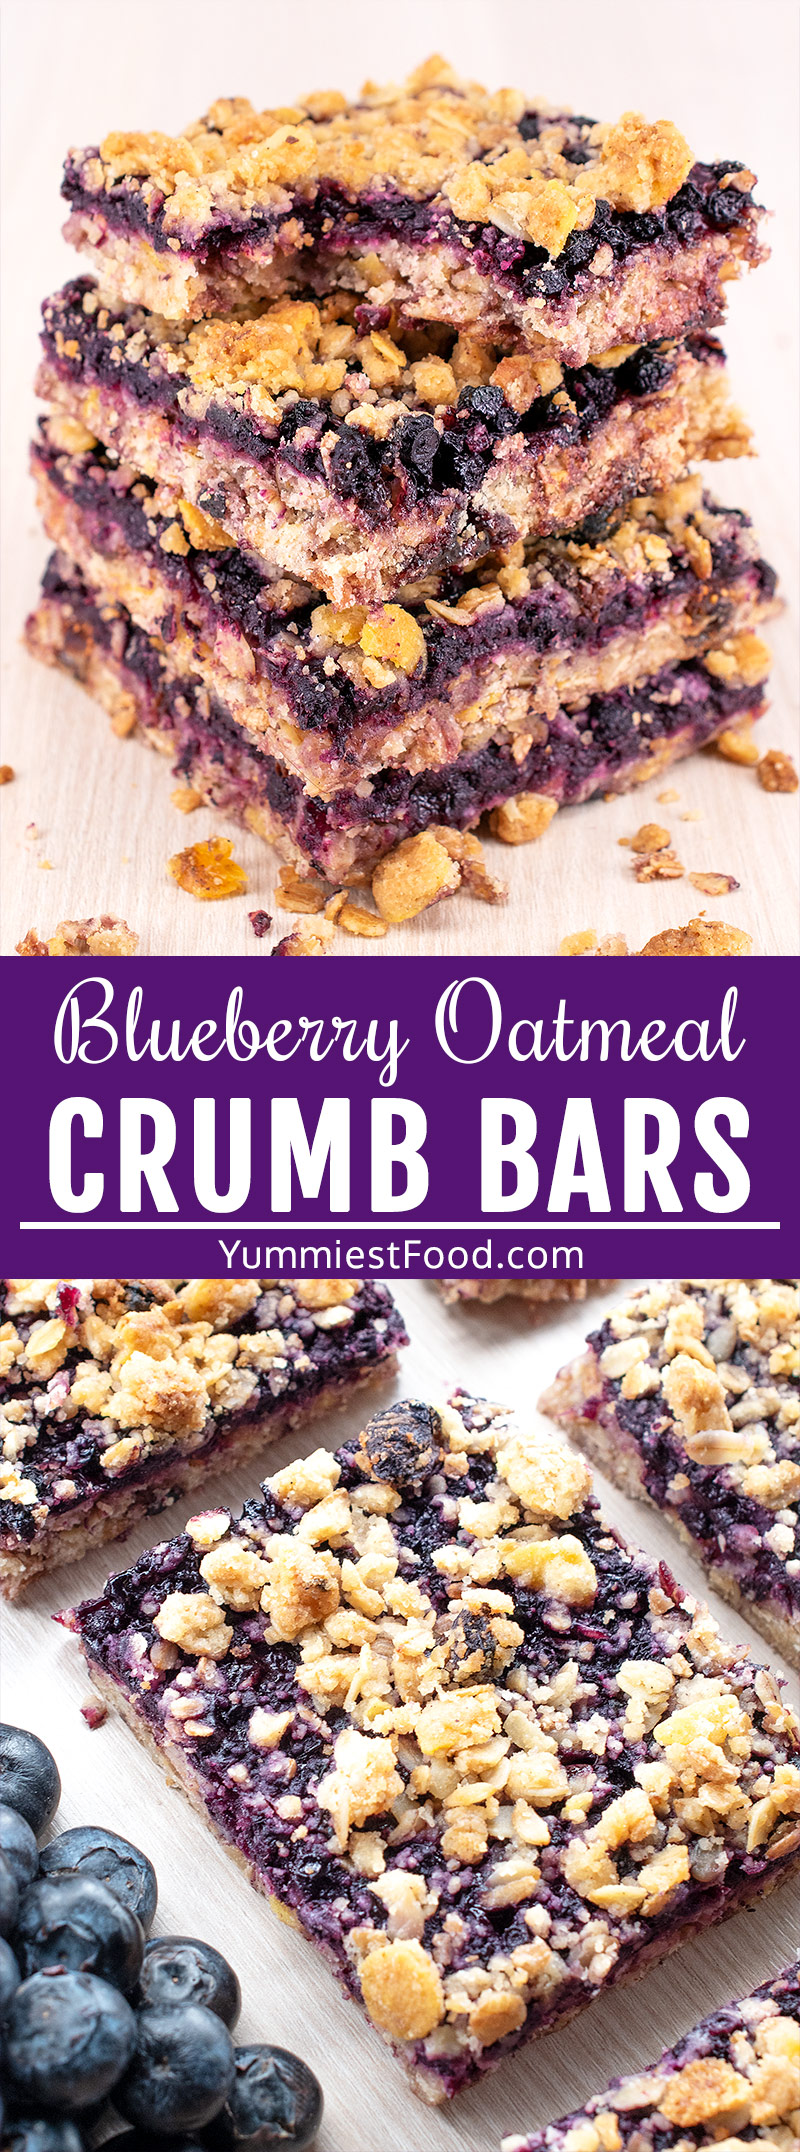 These easy Healthy Breakfast Blueberry Oatmeal Crumb Bars are perfect for breakfast, snack or dessert and are suitable for people who follow the Paleo diet or love clean eating